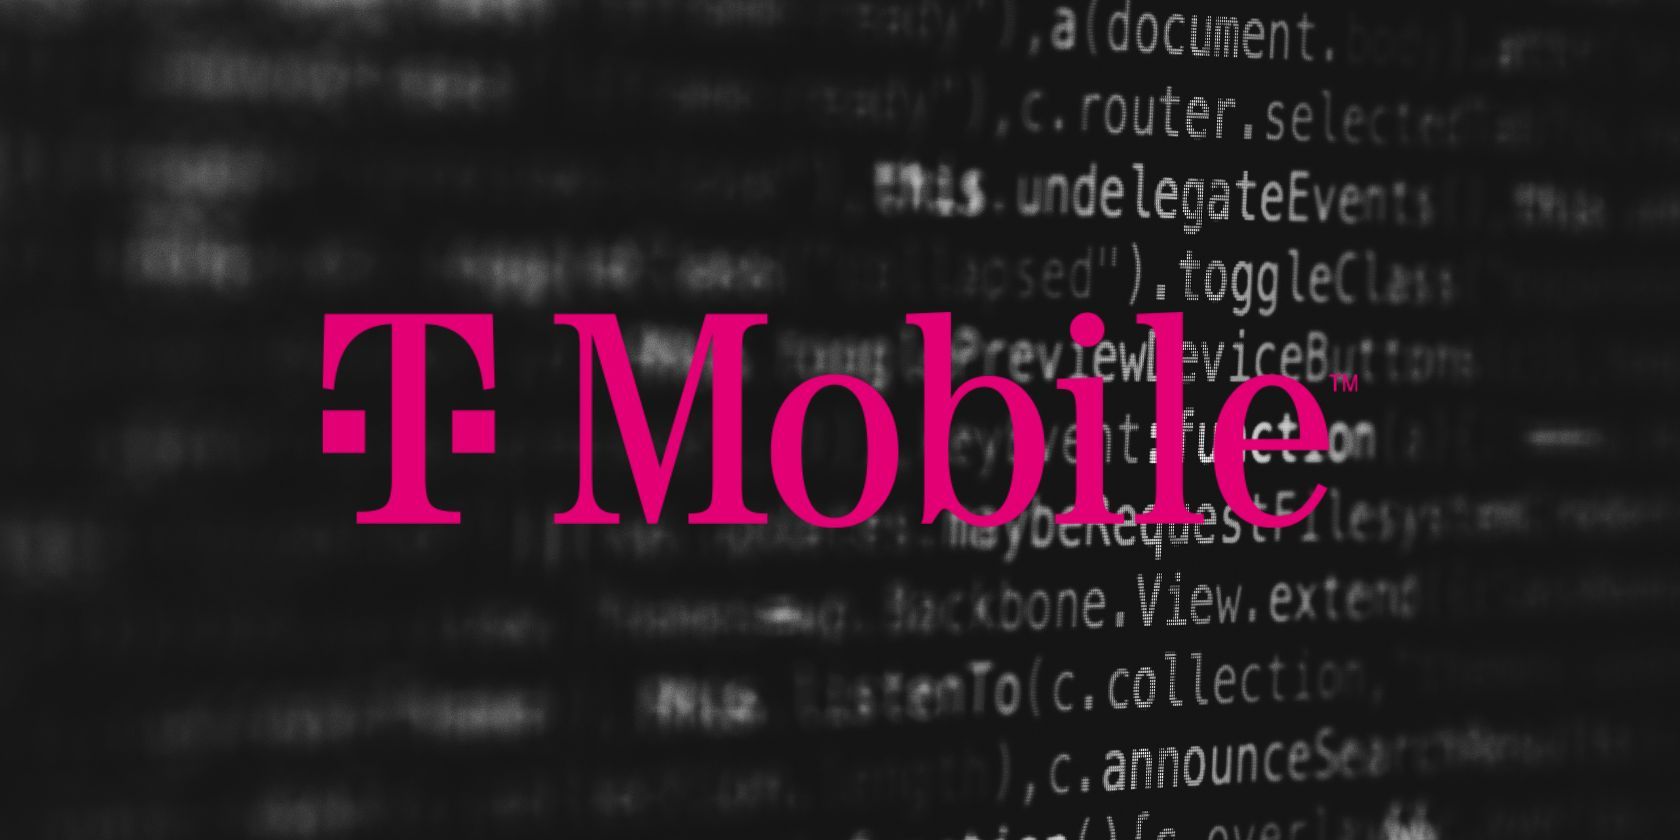 t-mobile logo in front of black and white photo of code